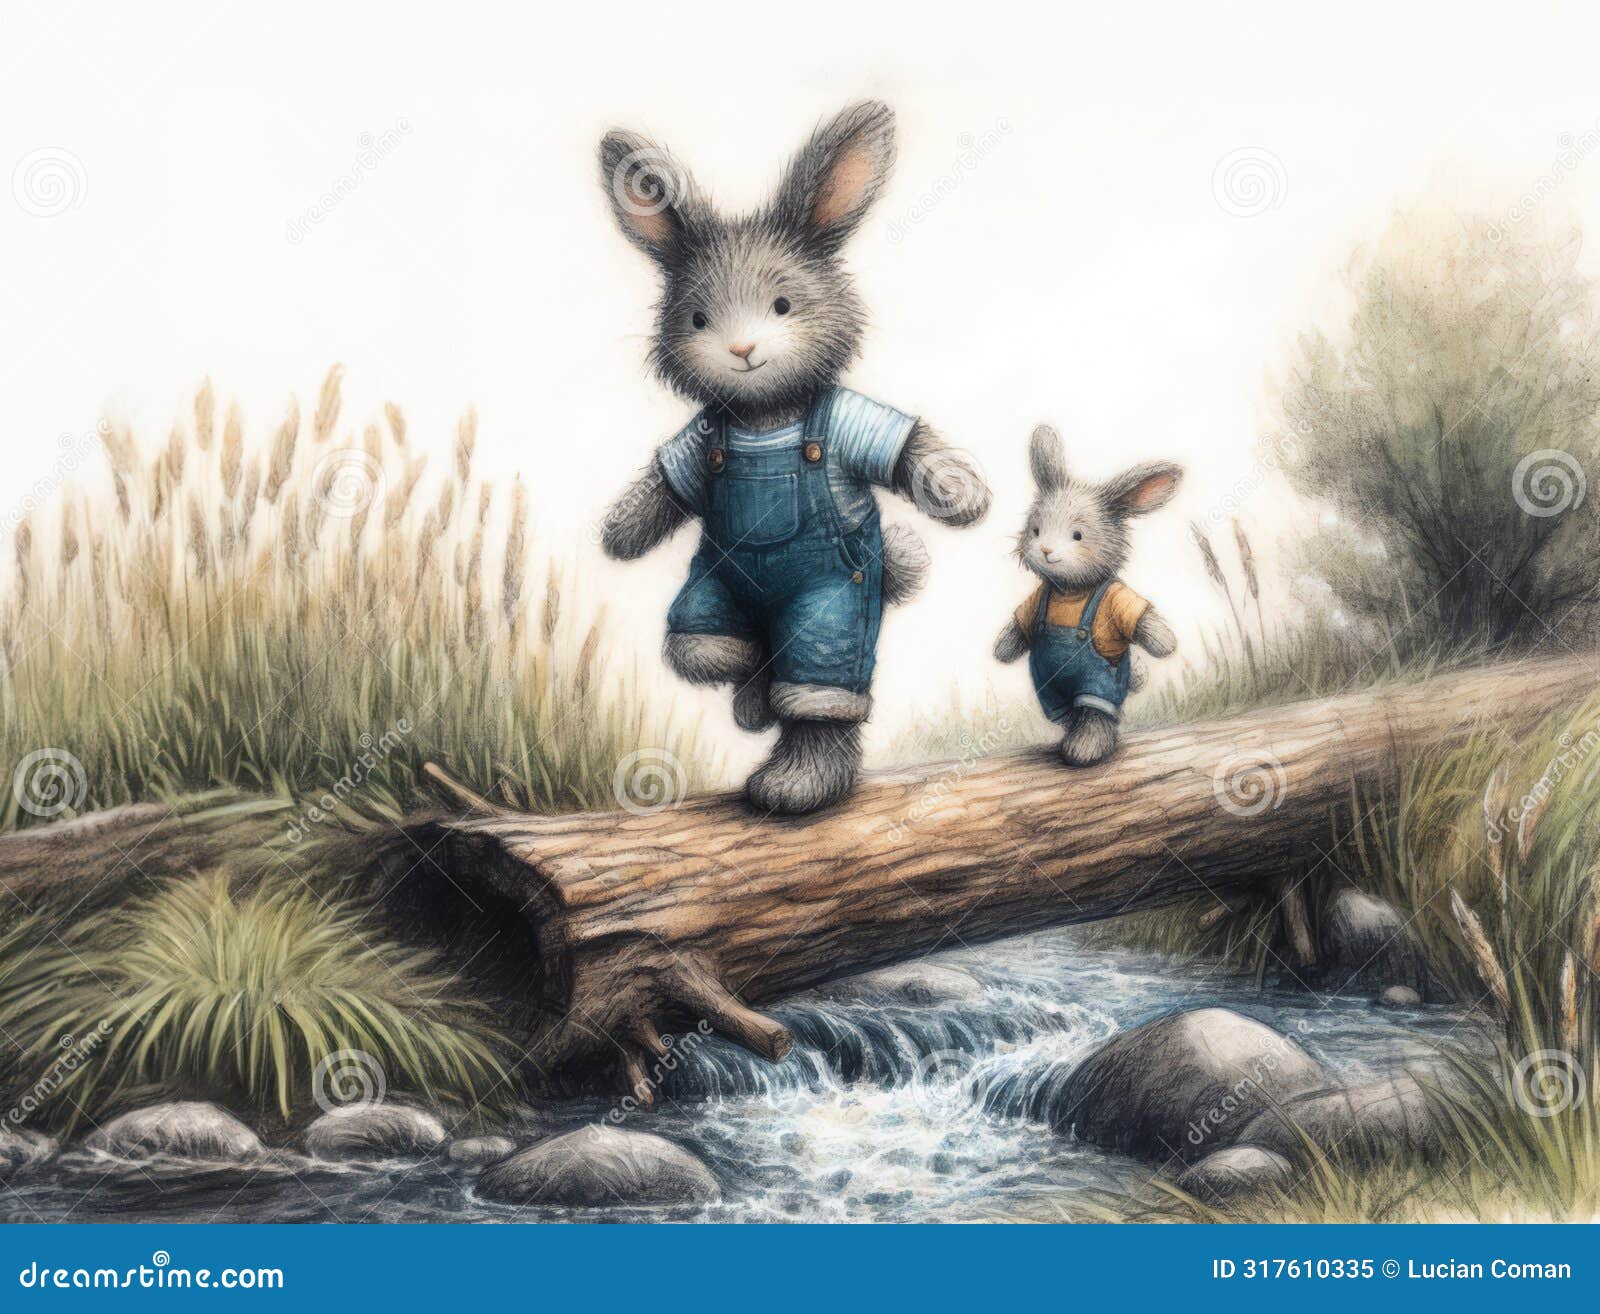 cartoon two happy bunnies father and son are balancing on a fallen log over a stream,